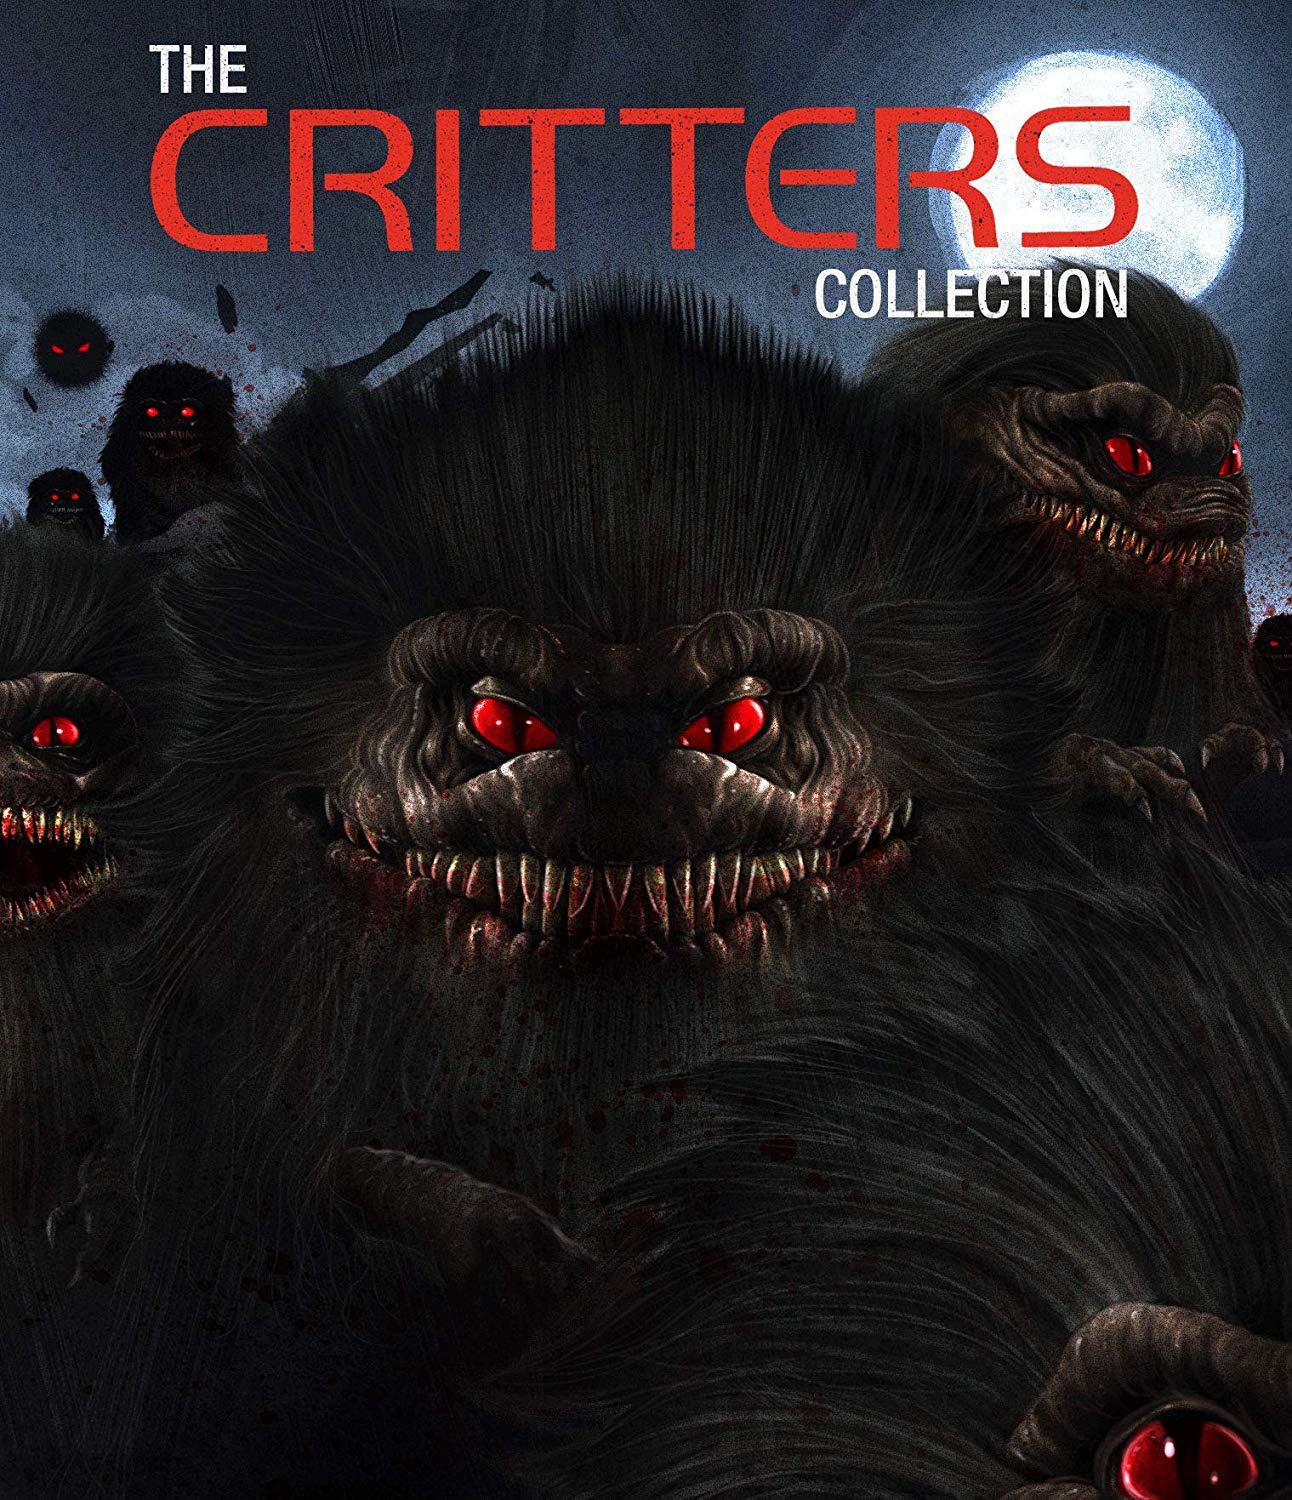 The Critters Collection Blu-Ray Blu-Ray